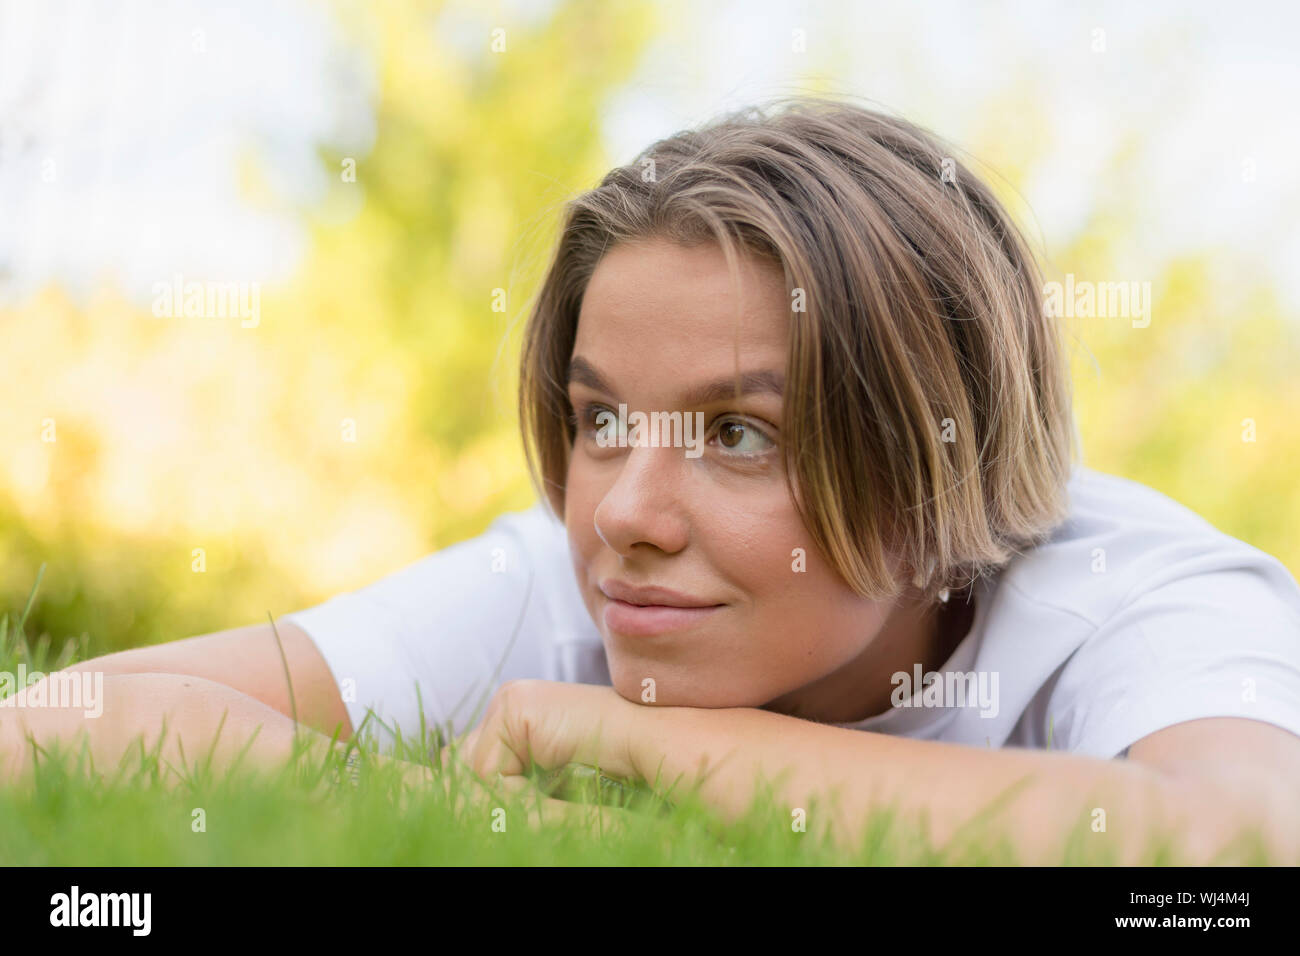 Young woman laying in grass Banque D'Images